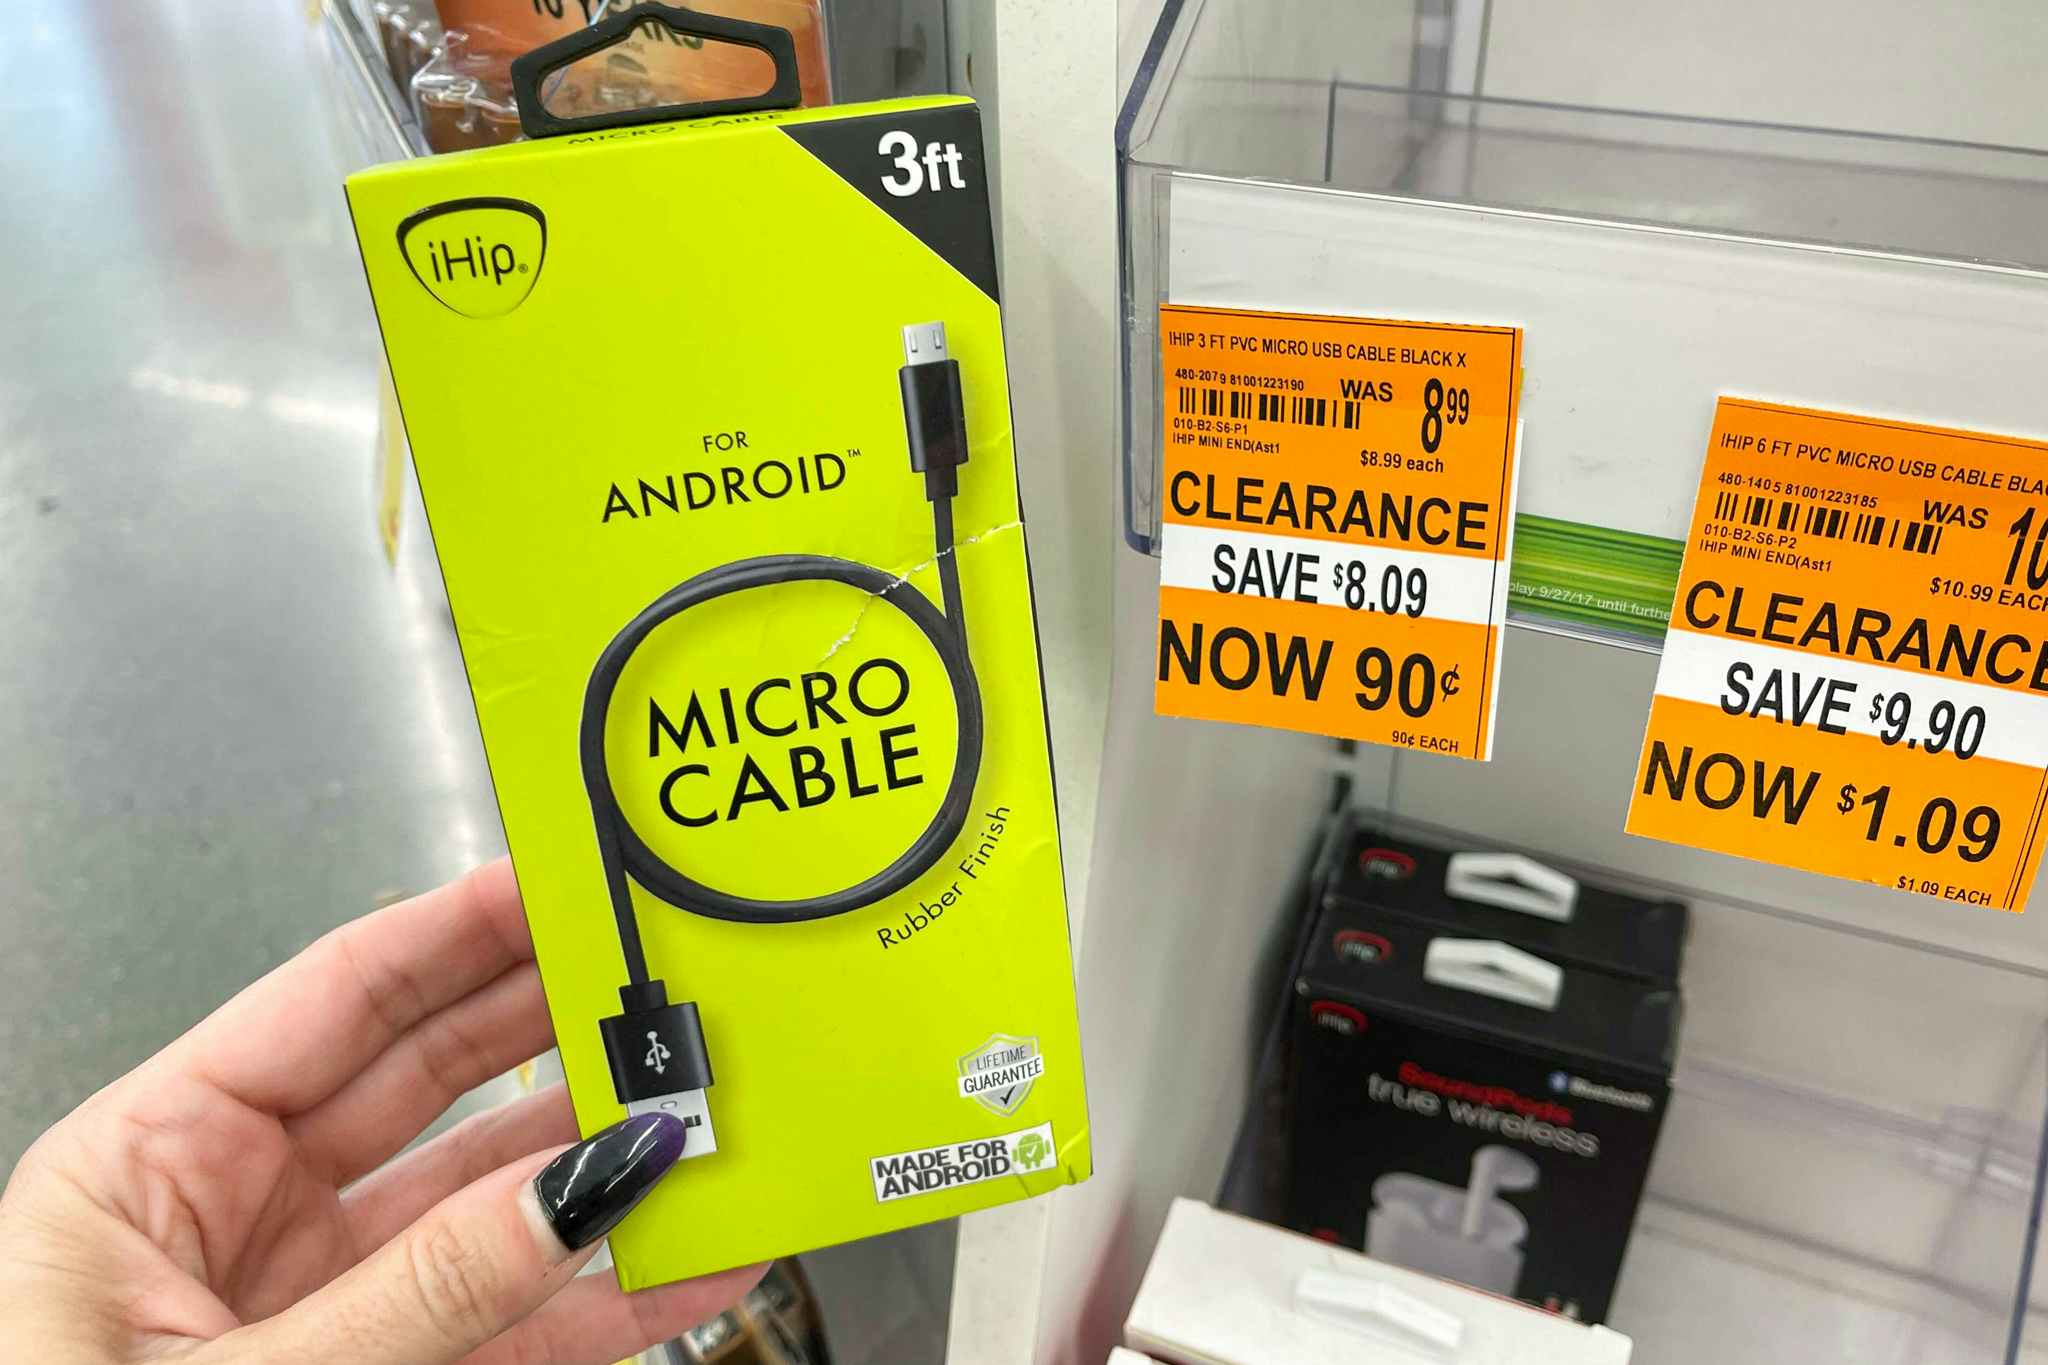 walgreens-3ft-micro-cable-2021